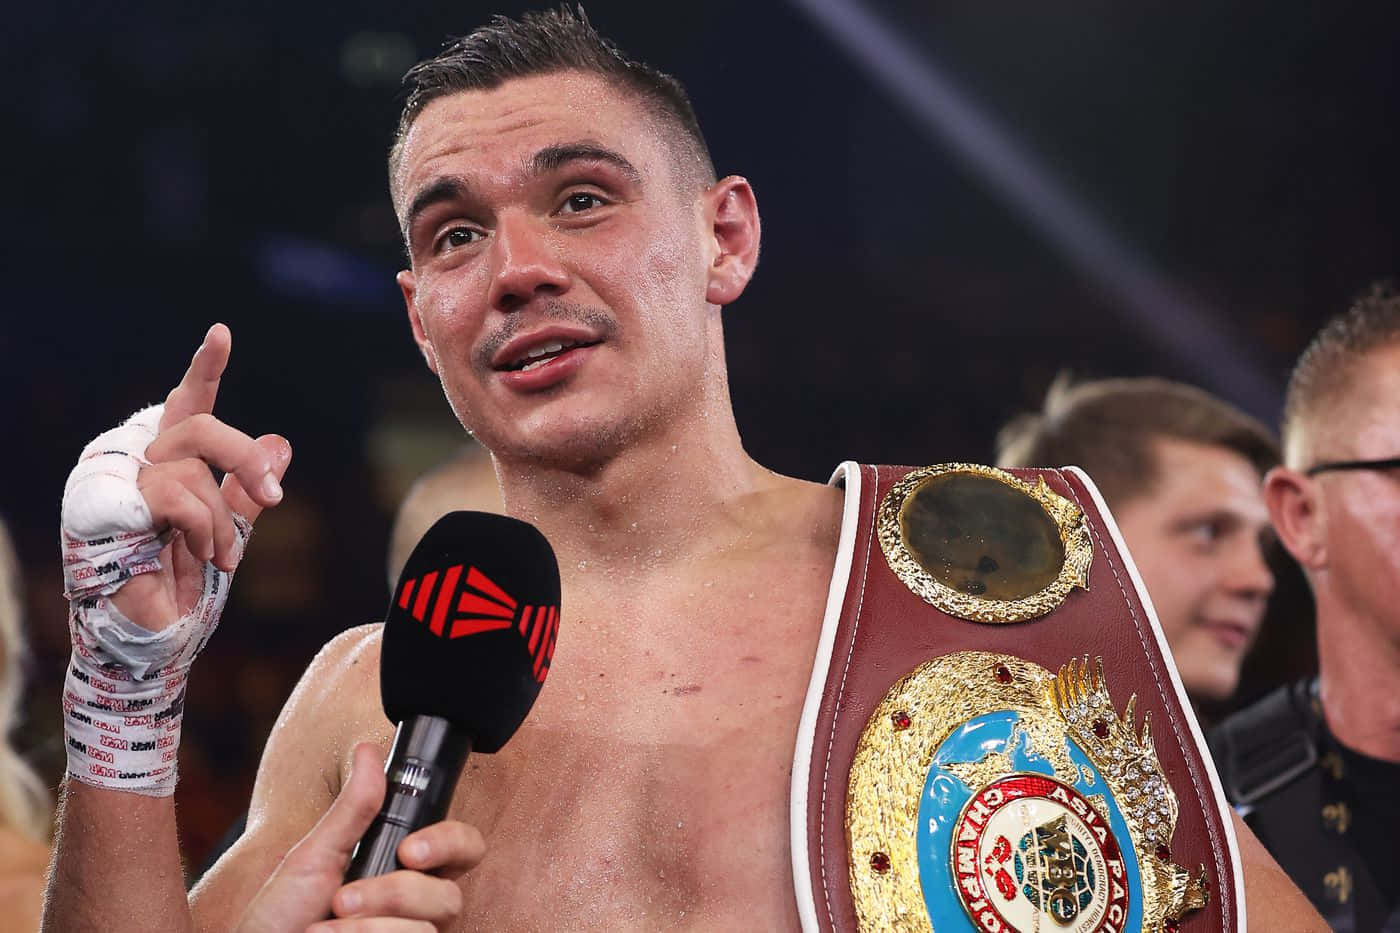 Professional boxer Tim Tszyu in action during a match Wallpaper